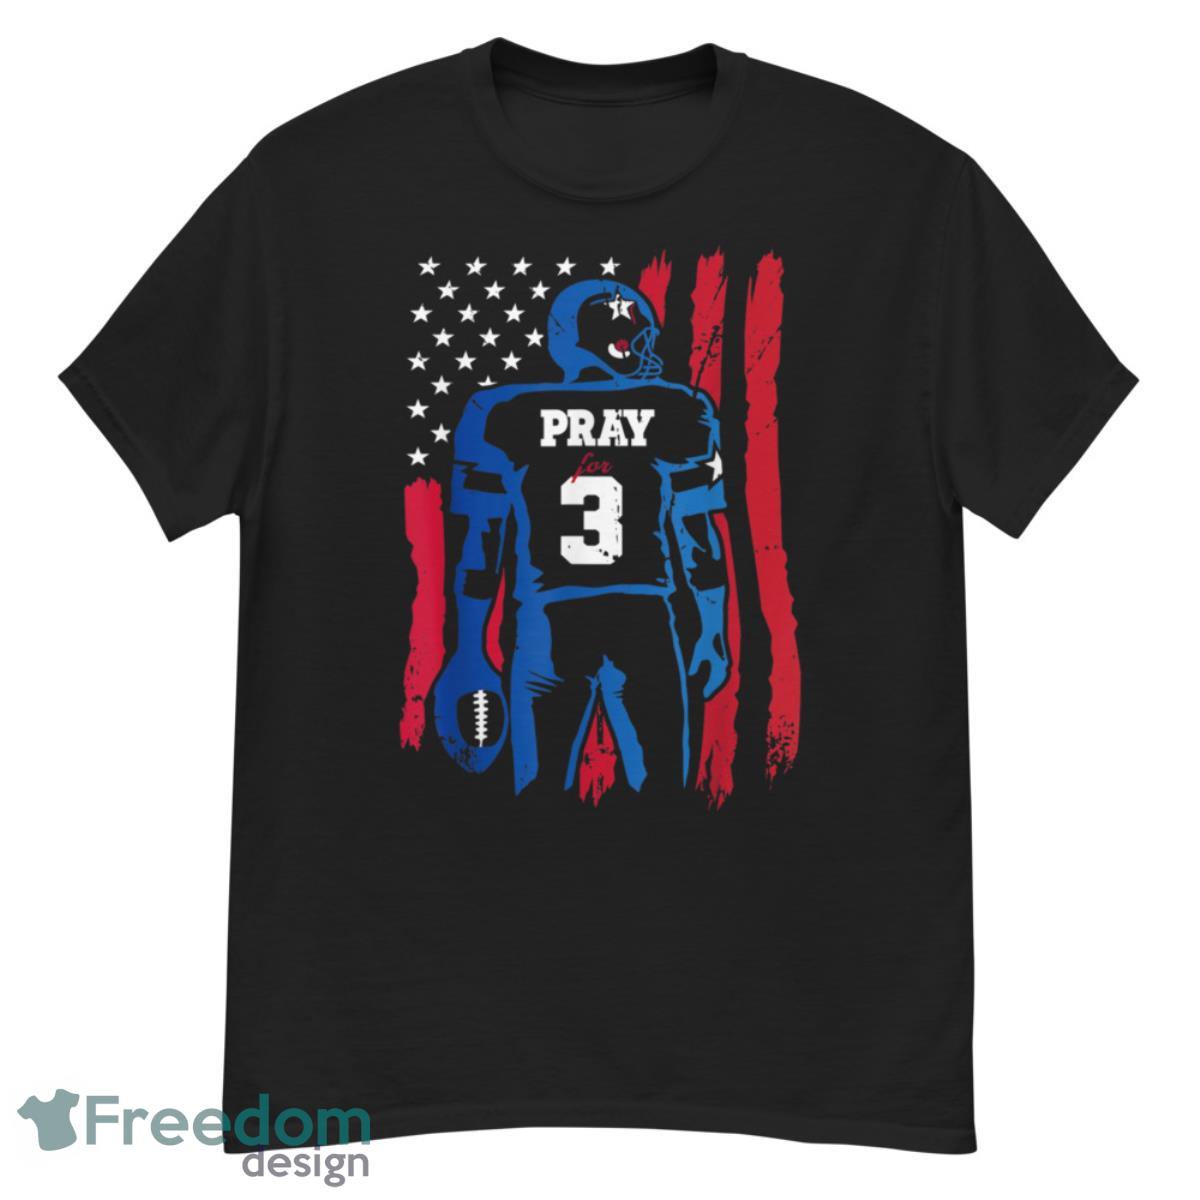 Pray for Damar 3 We are with you Damar Love Shirt - G500 Men’s Classic T-Shirt